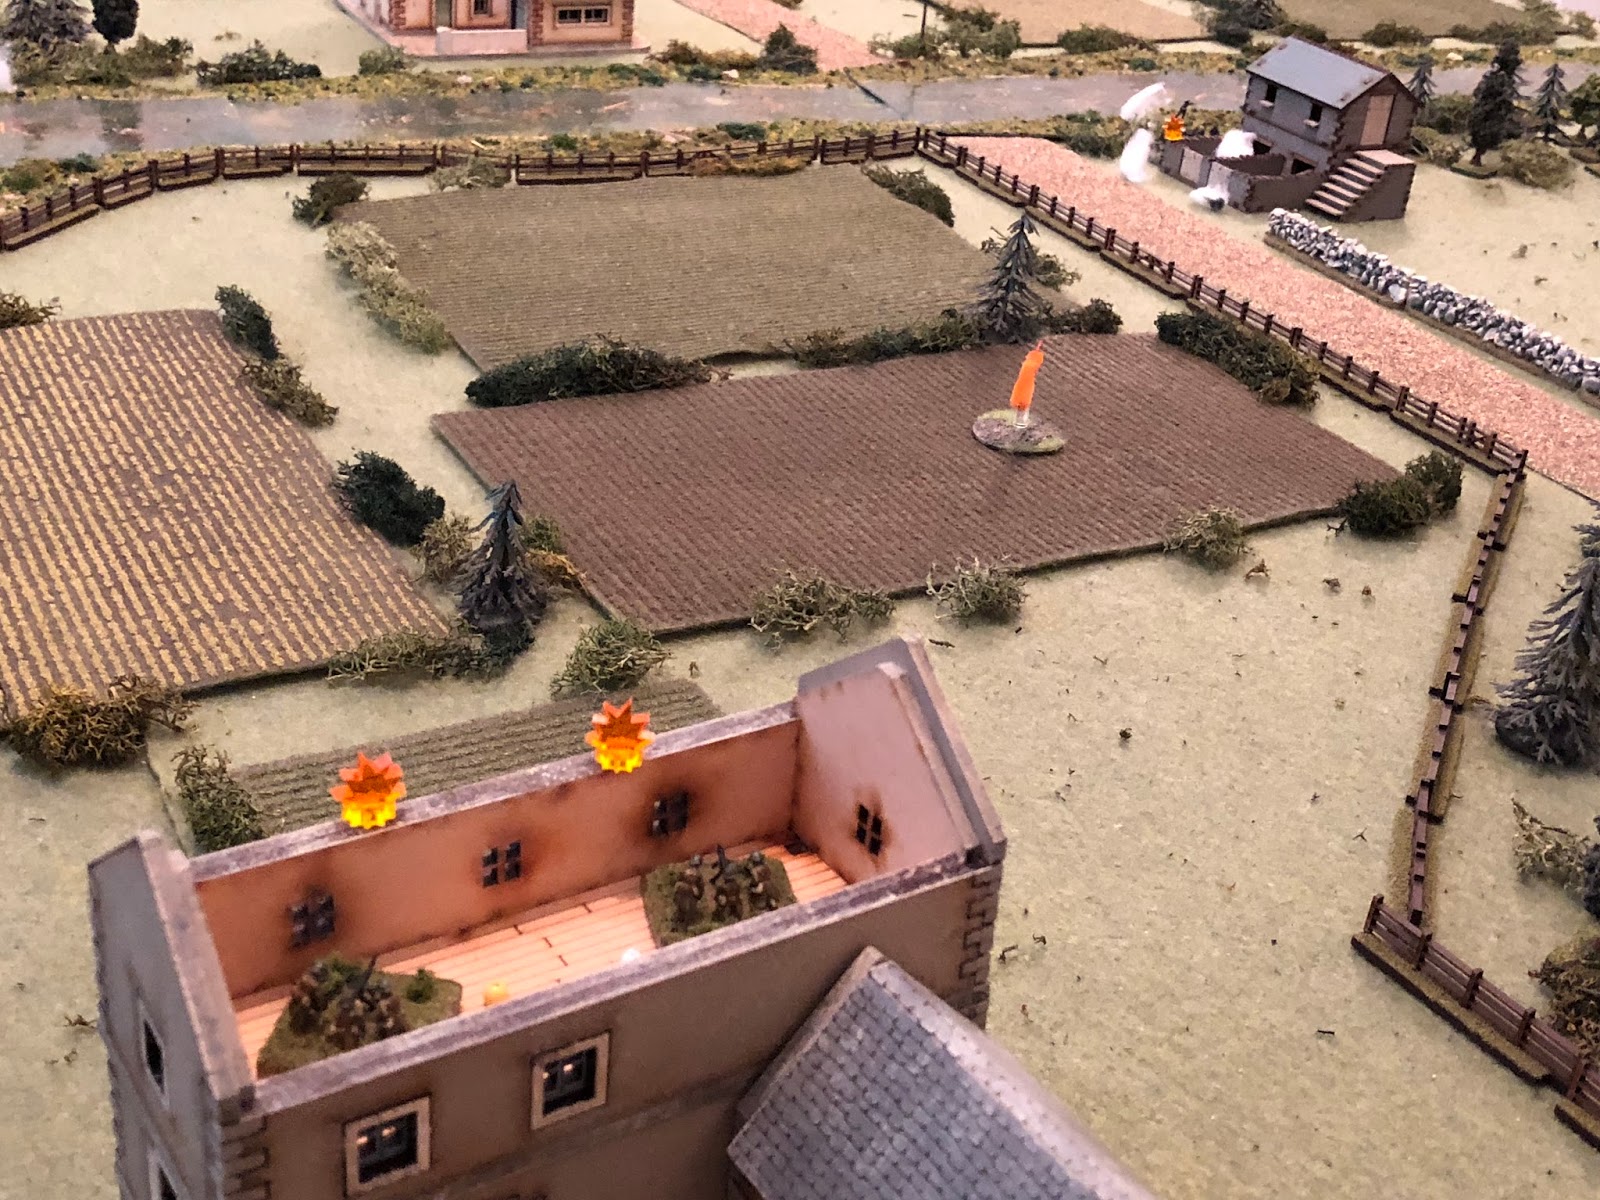  With one of the MG teams still suppressed (bottom center), the other French MG team (bottom left) turns on the tollkeeper's house (top right) and cuts loose on the two German engineer squads, but they're safely hunkered down in cover. 